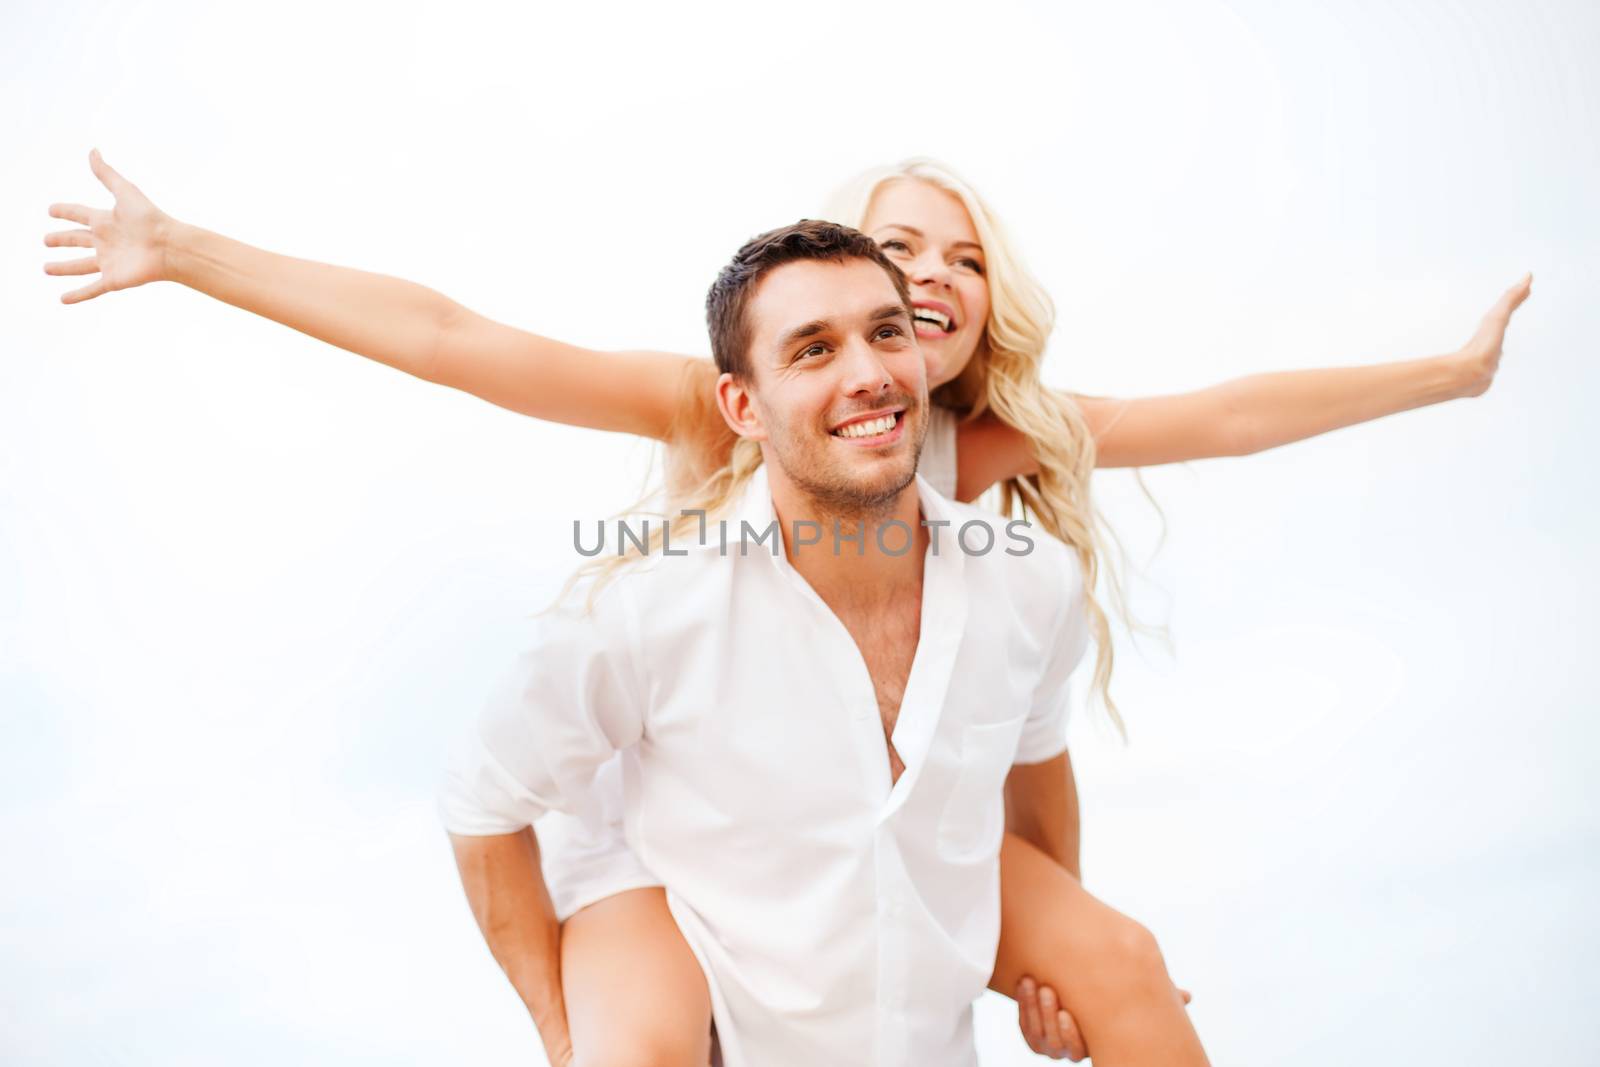 summer holidays, celebration and dating concept - couple at seaside